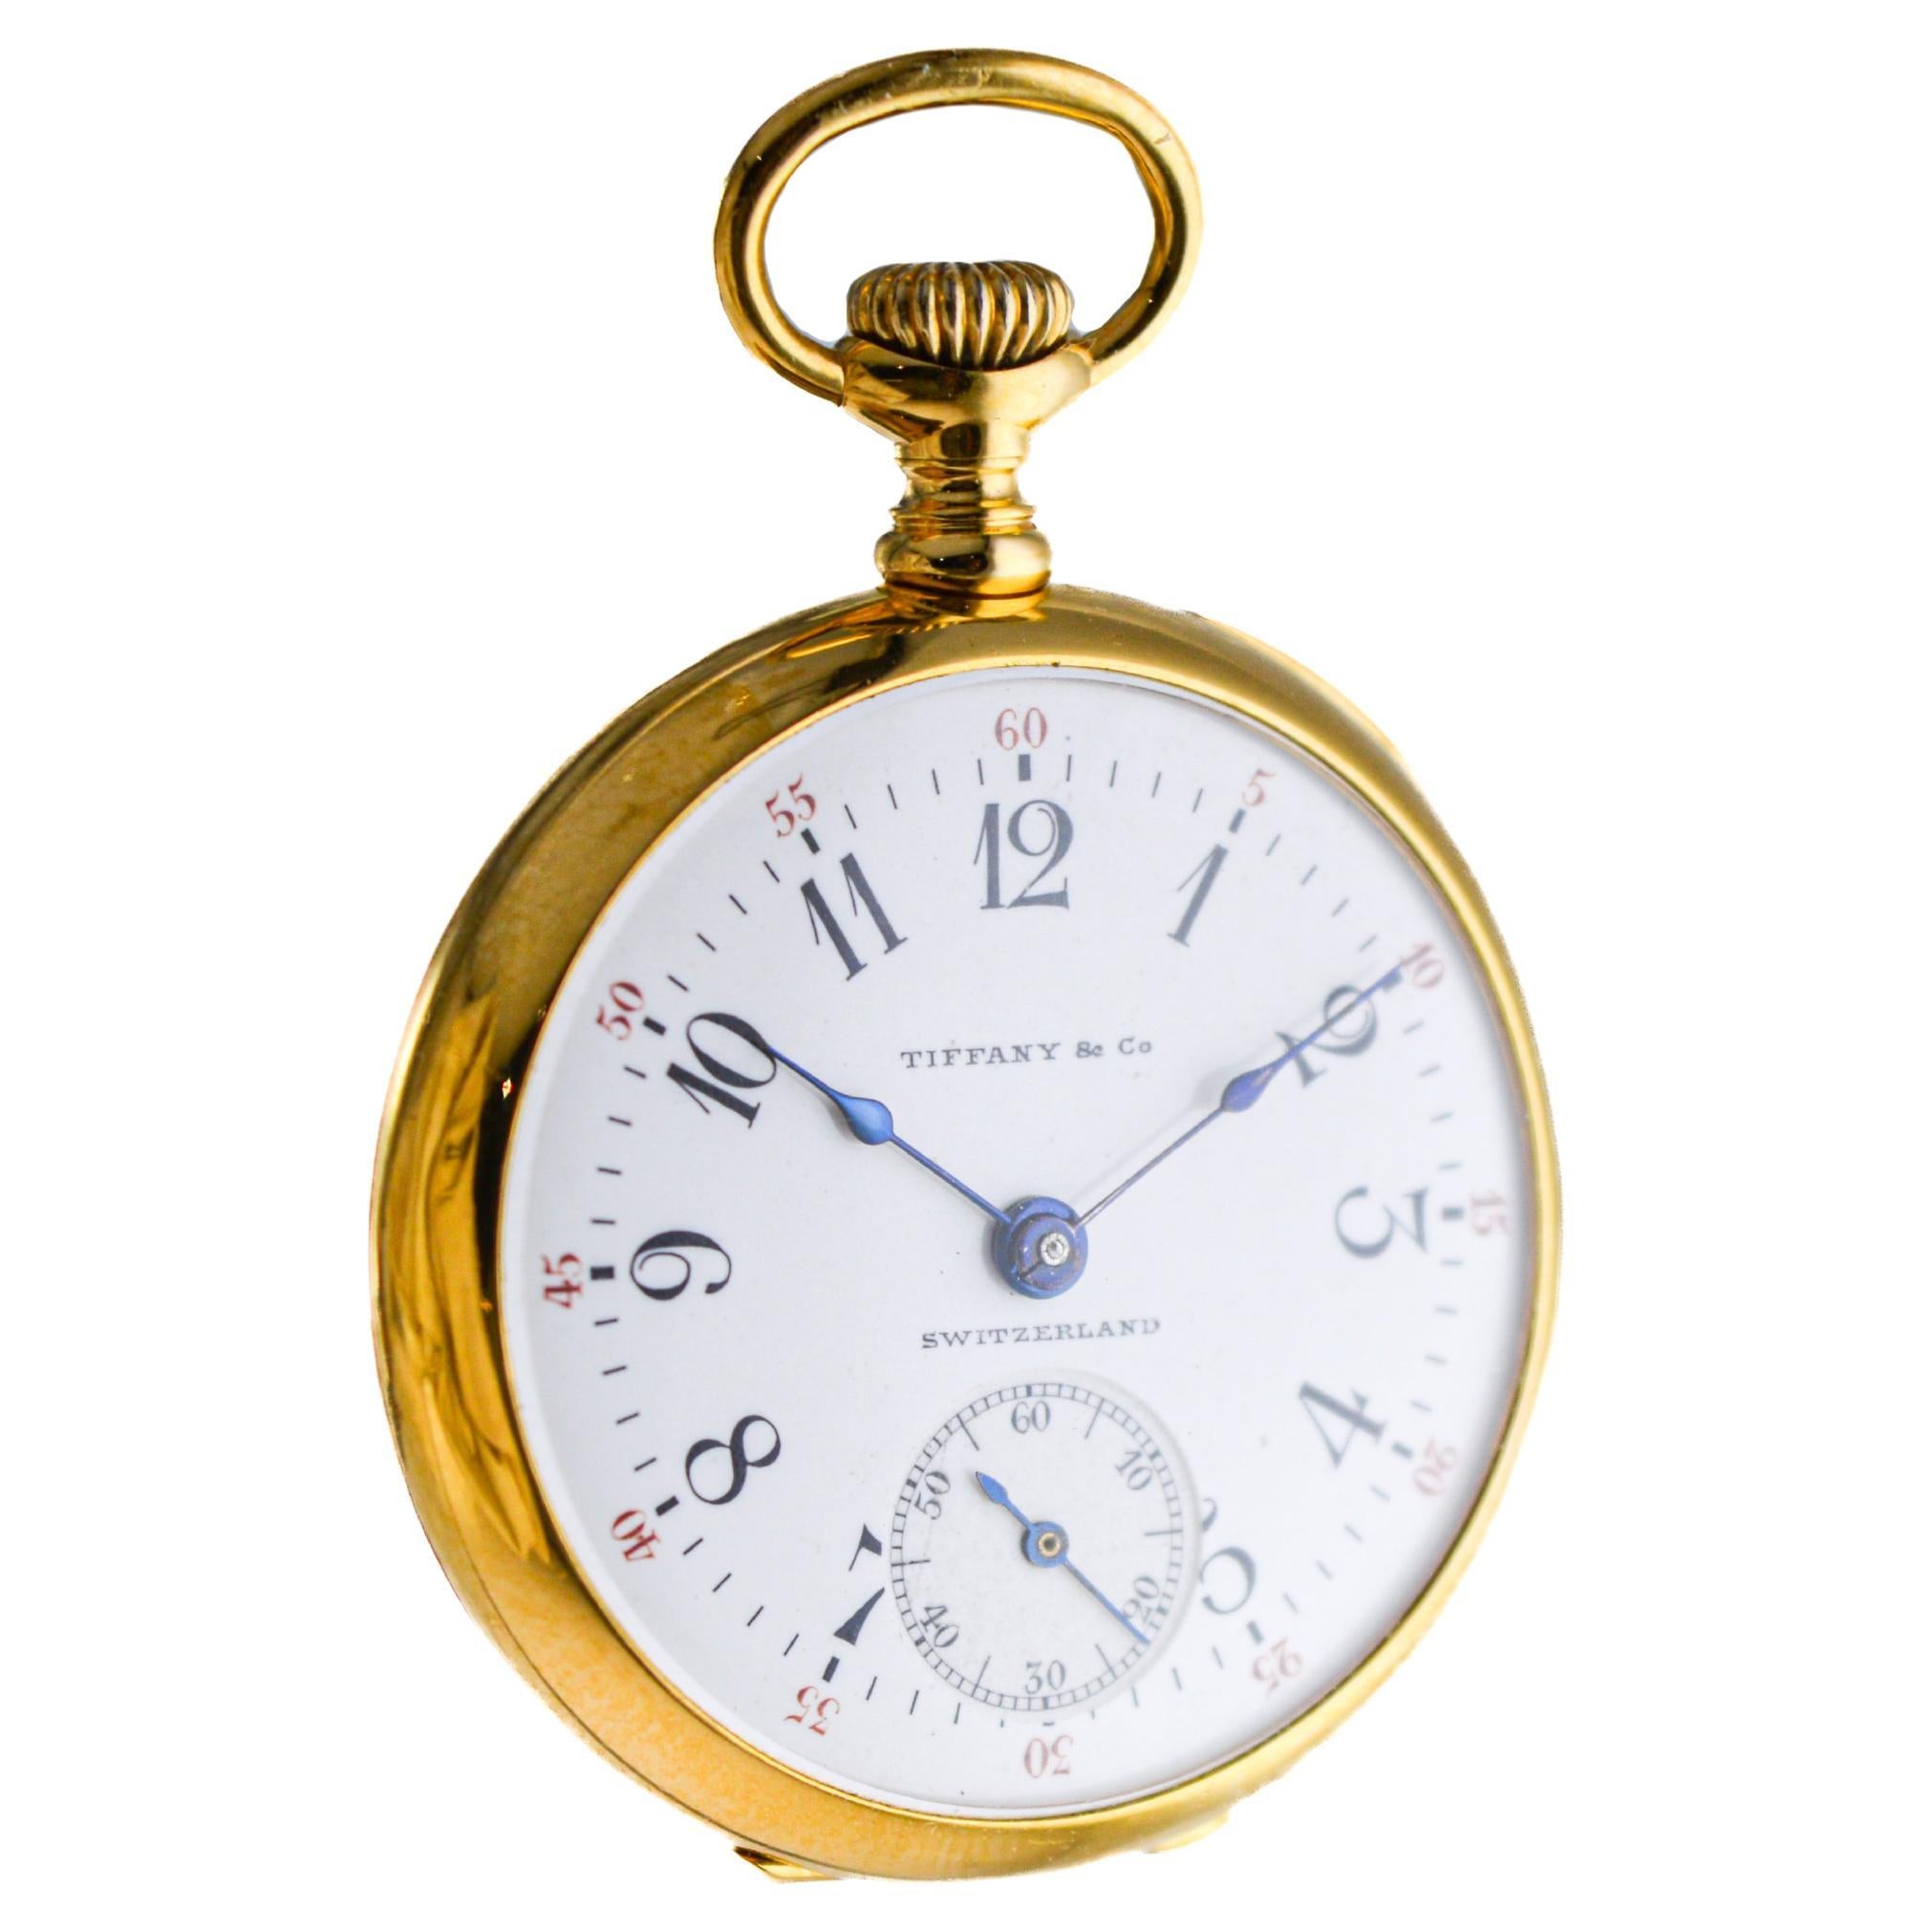 Art Deco Tiffany & Co 18Kt Gold Pendant Watch with Gold Chain from 1912 Enamel Dial For Sale